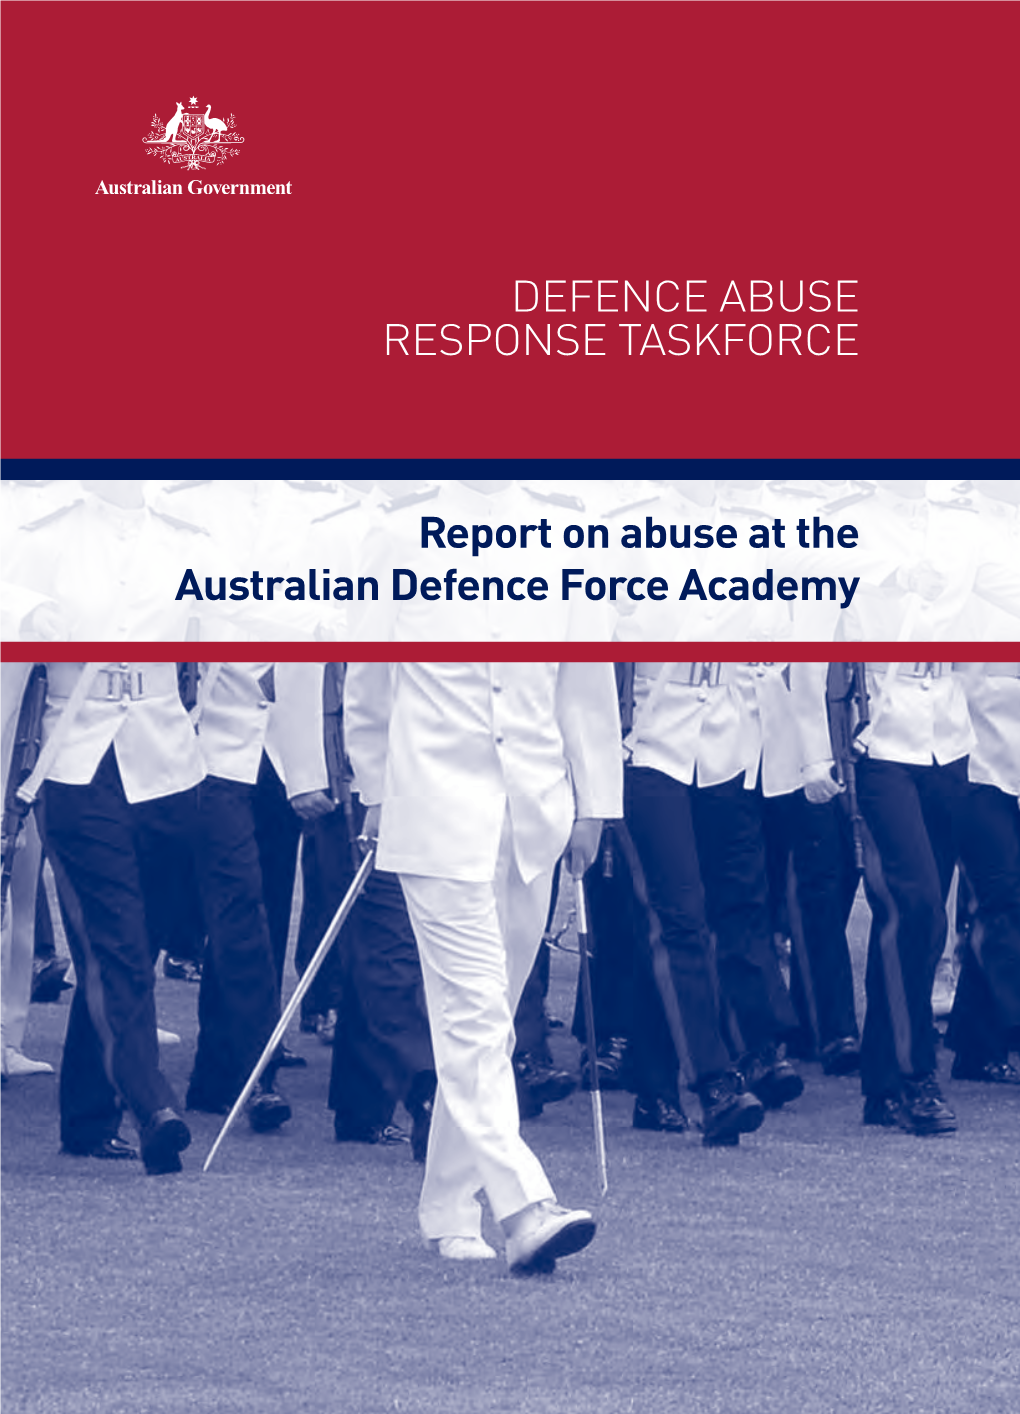 Report on Abuse at the Australian Defence Force Academy REPORT on ABUSE at the AUSTRALIAN DEFENCE FORCE ACADEMY Defence Abuse Response Taskforce